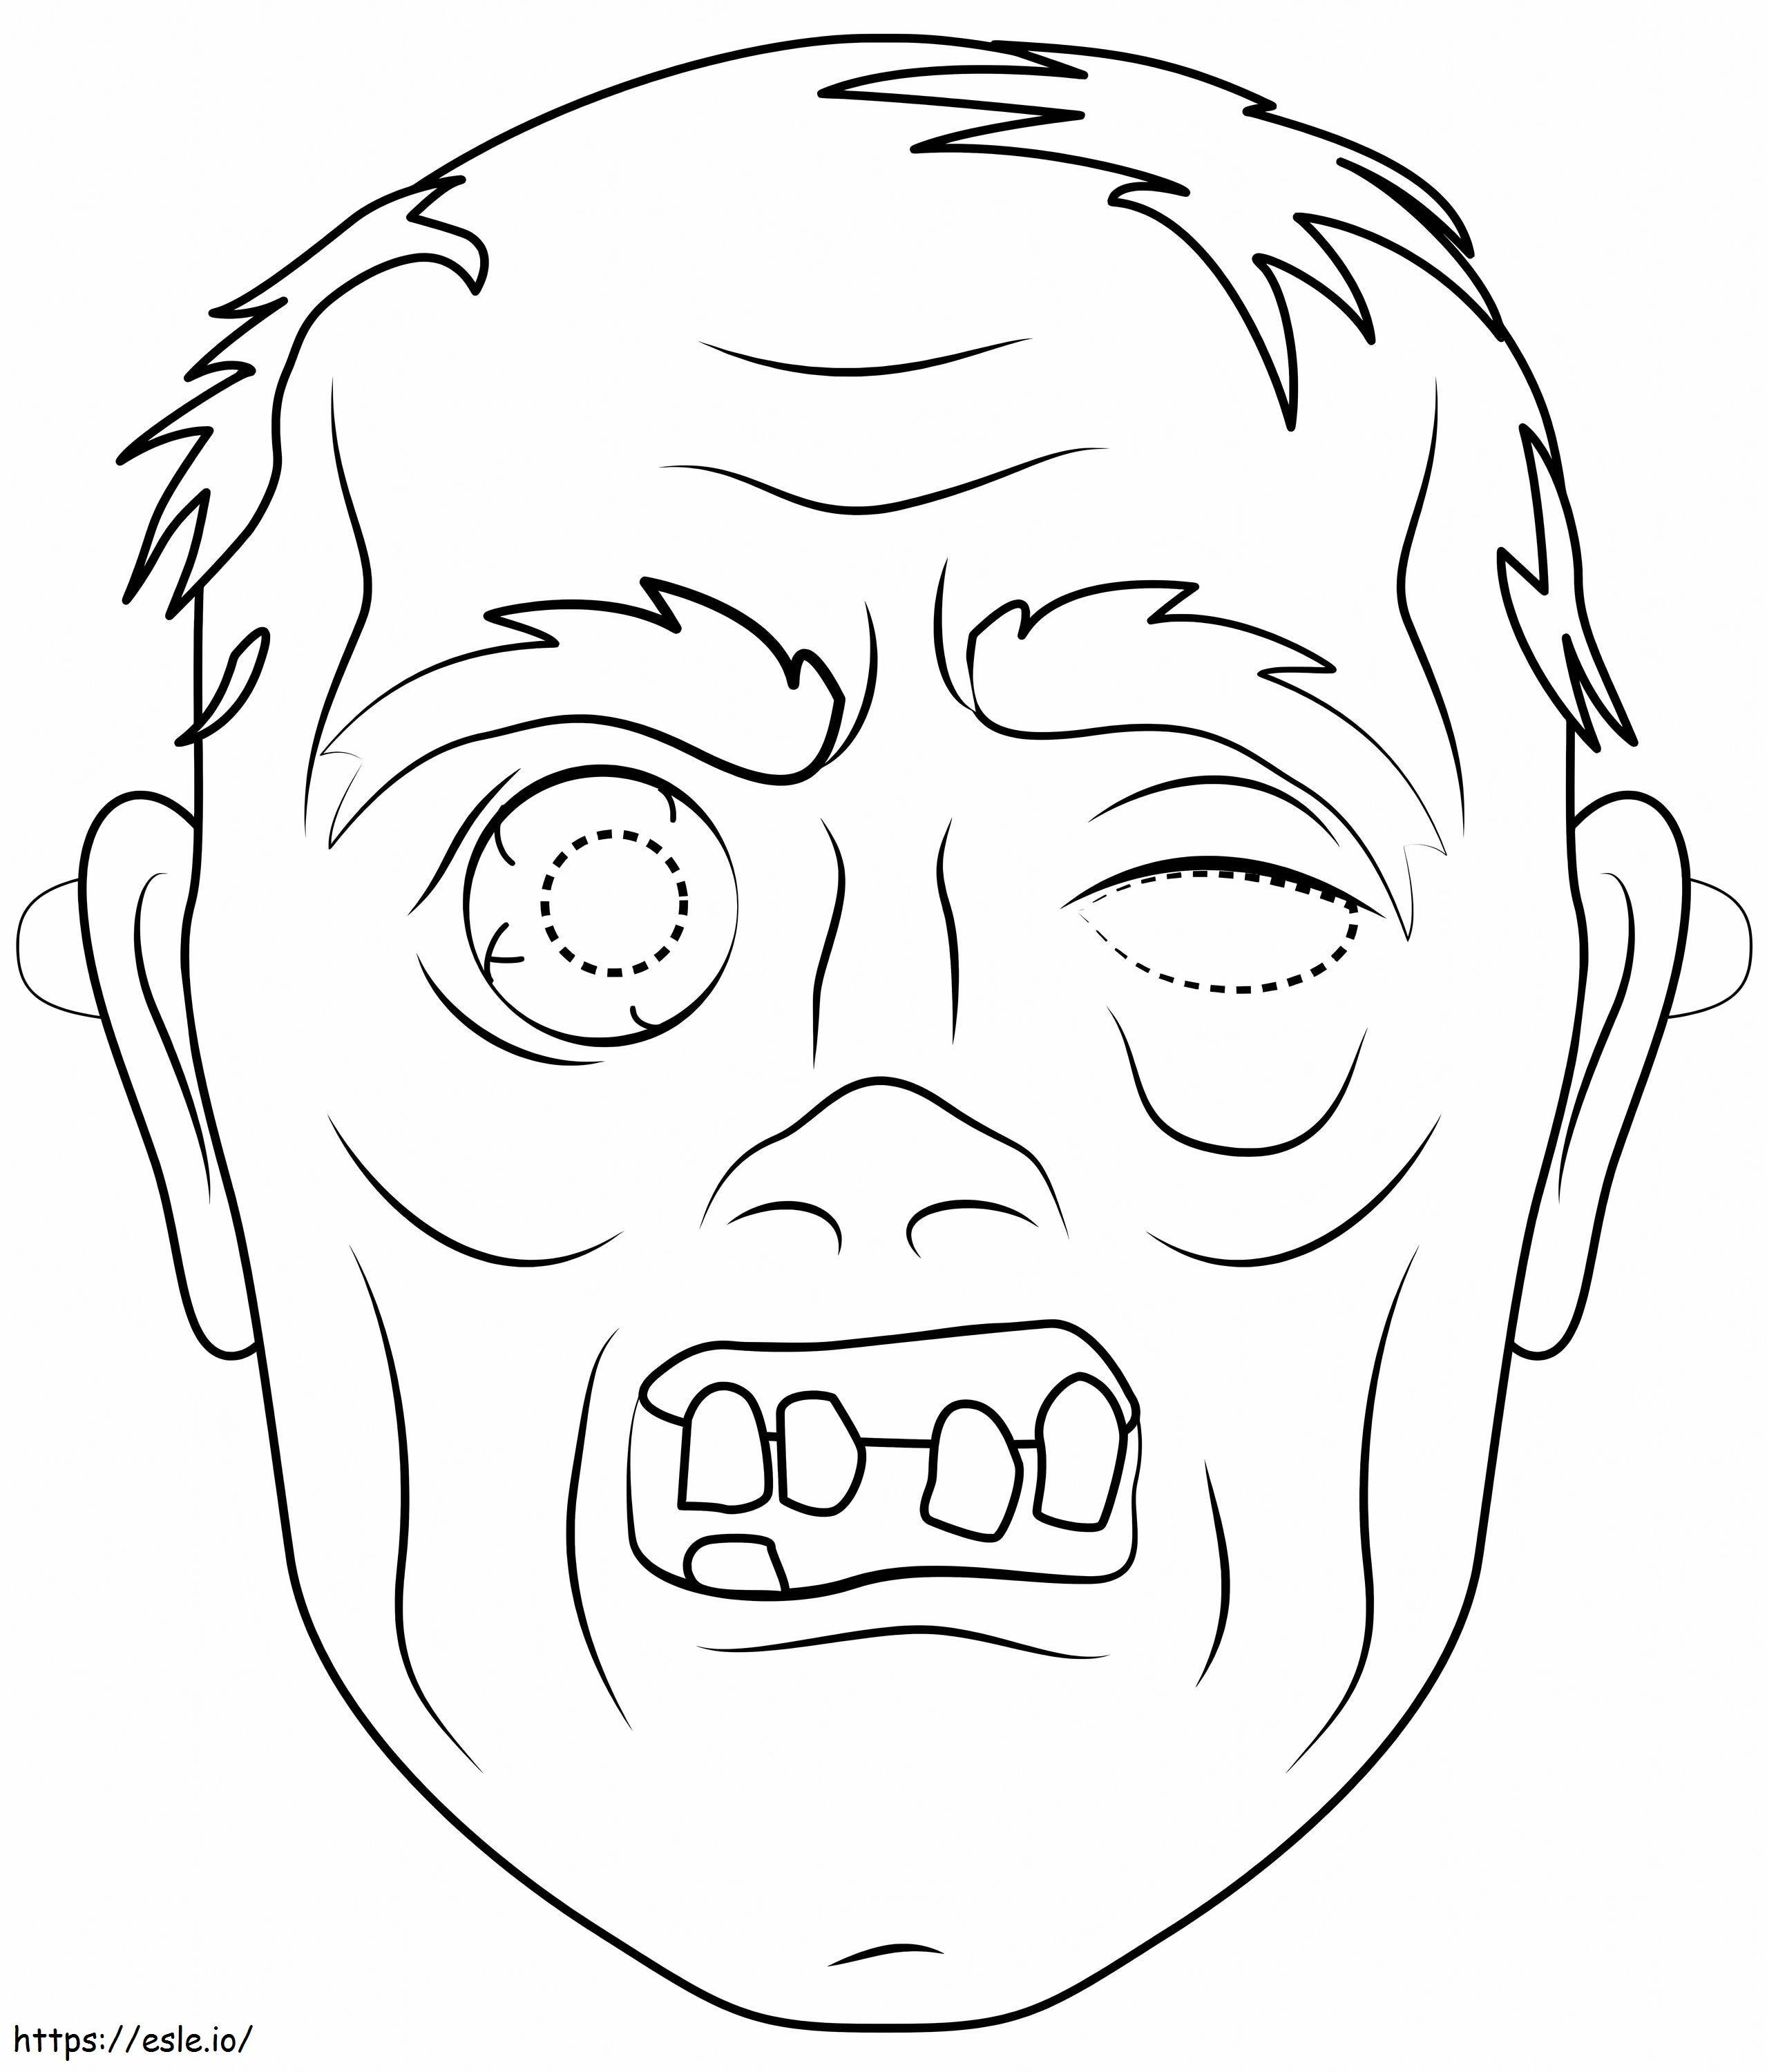 Halloween Mask 3 coloring page